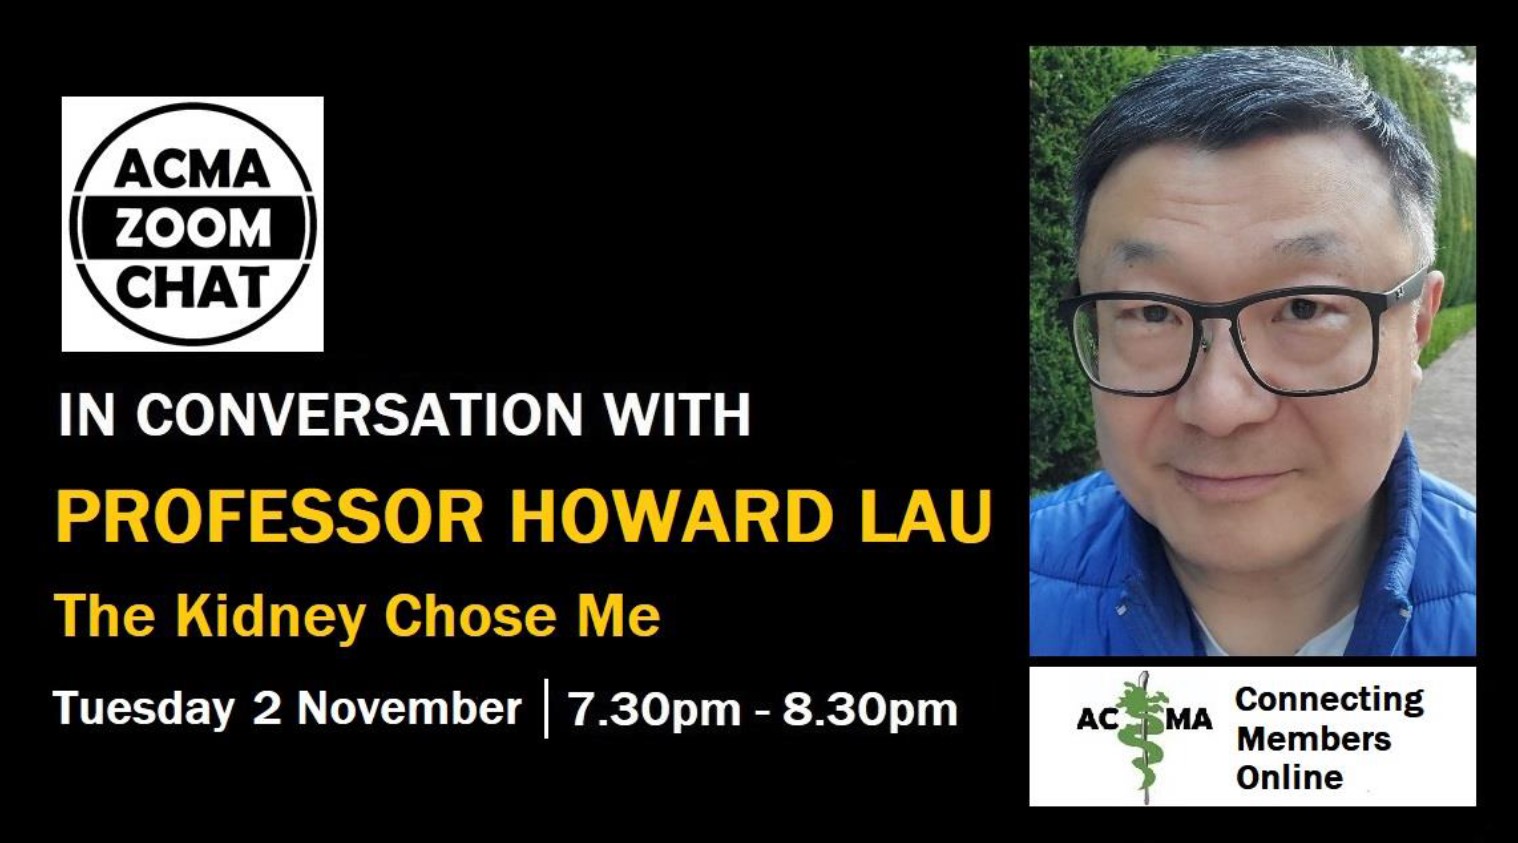 ACMA Chat Event Banner, featuring A/Prof Stephen LiACMA Chat Event Banner, featuring Prof Howard Lau